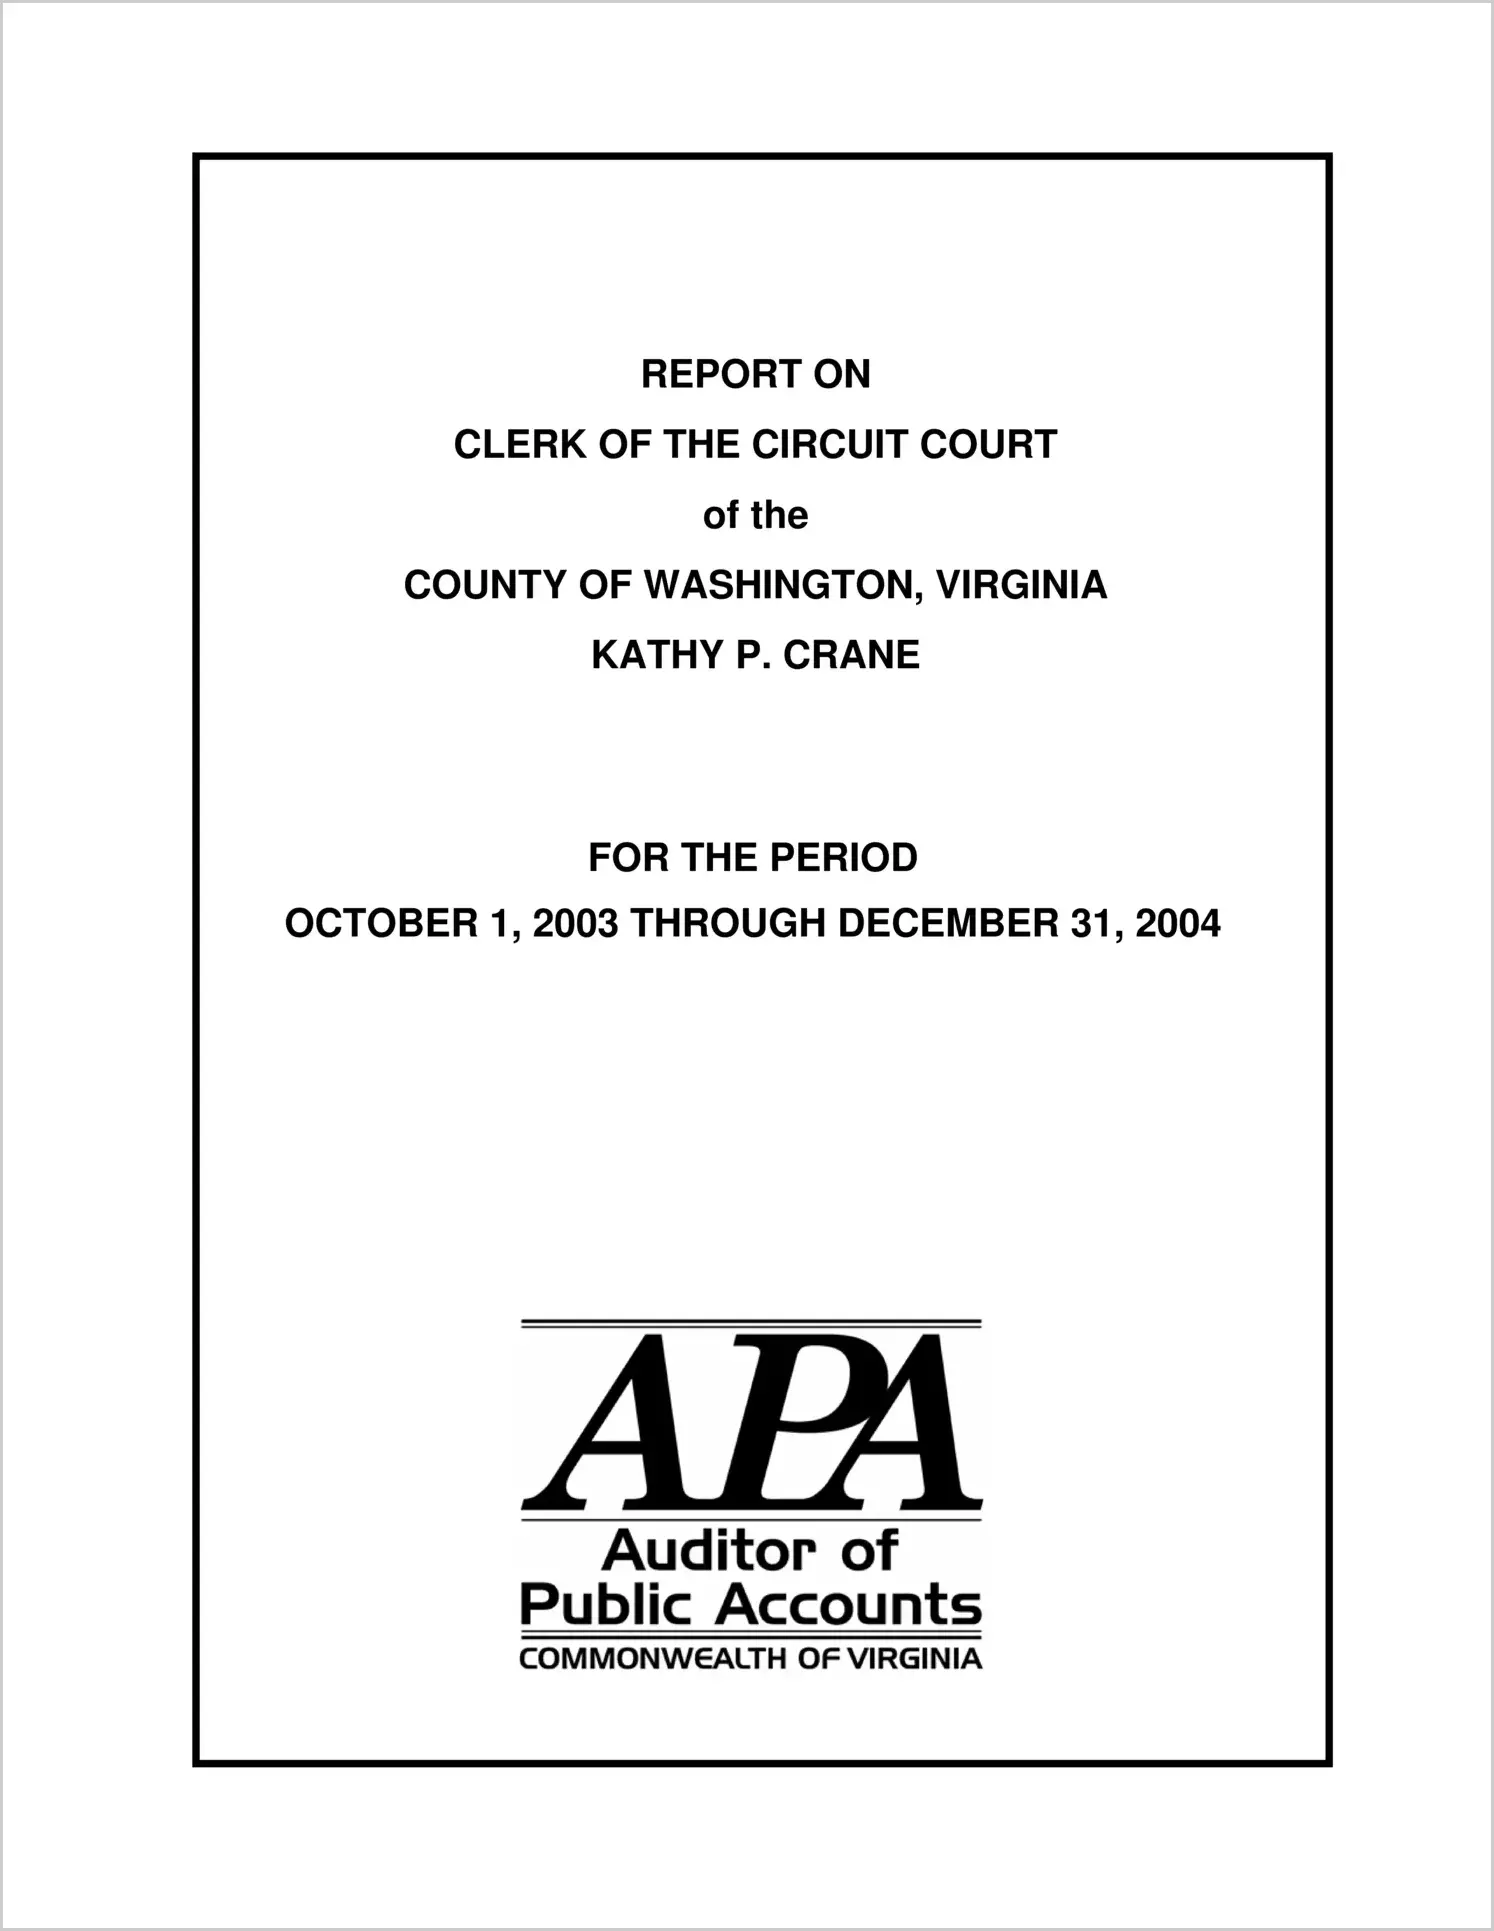 Clerk of the Circuit Court of the County of Washington for the period October 1, 2003 through December 31, 2004